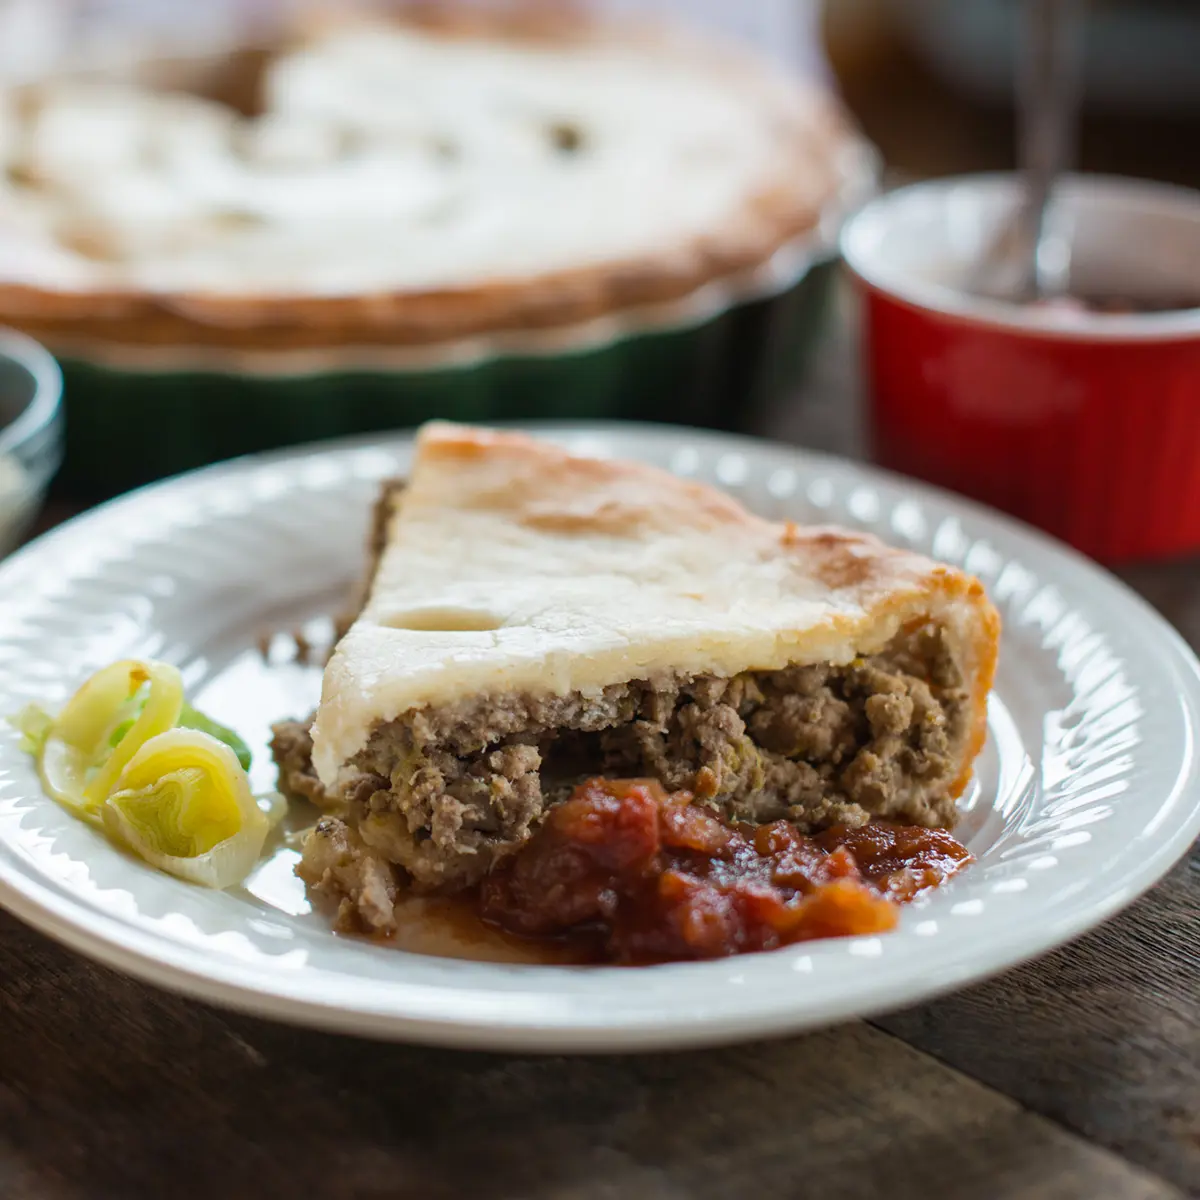 Meat pie with leeks and mushrooms